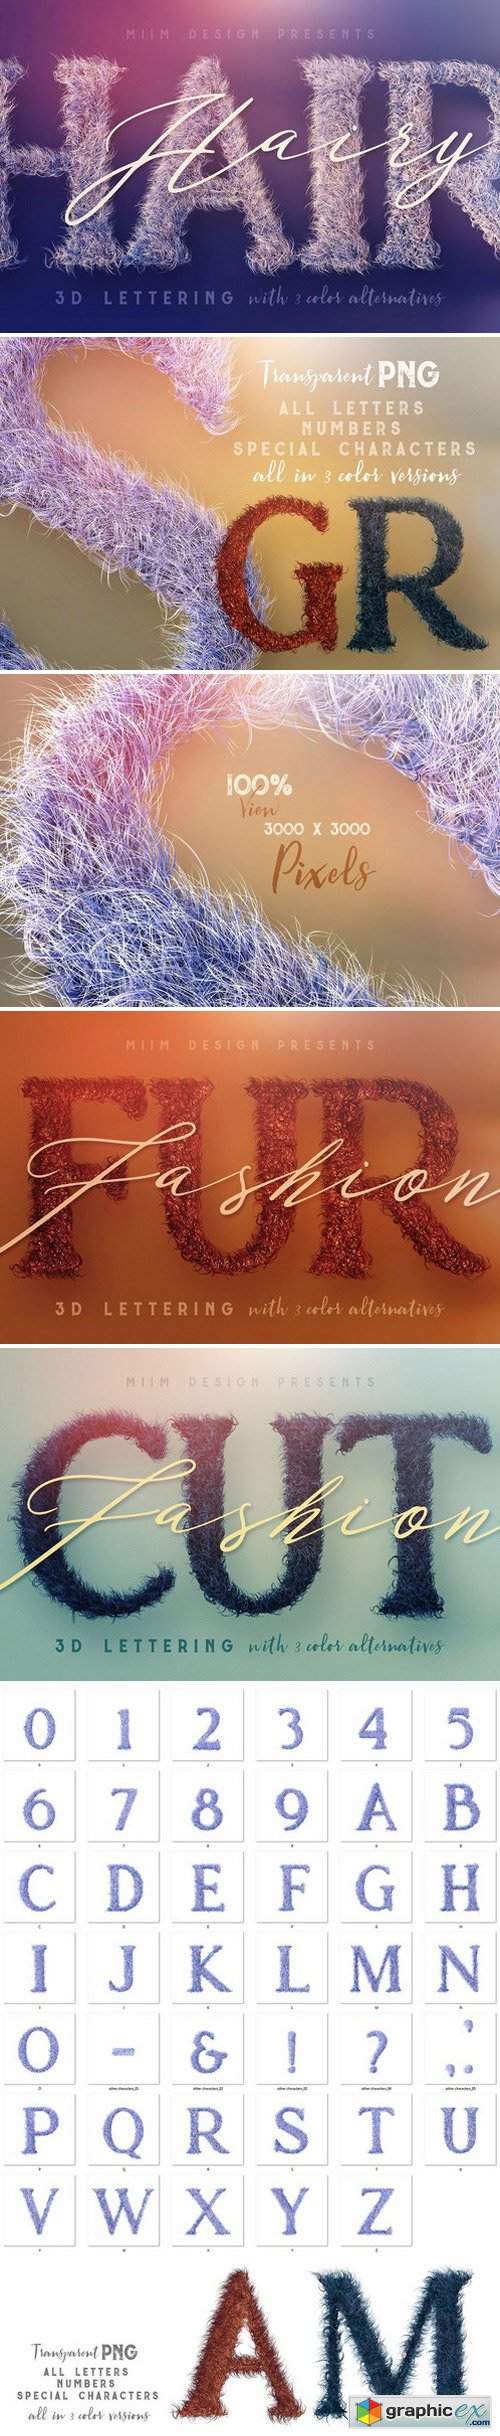 Hairy - 3D Lettering